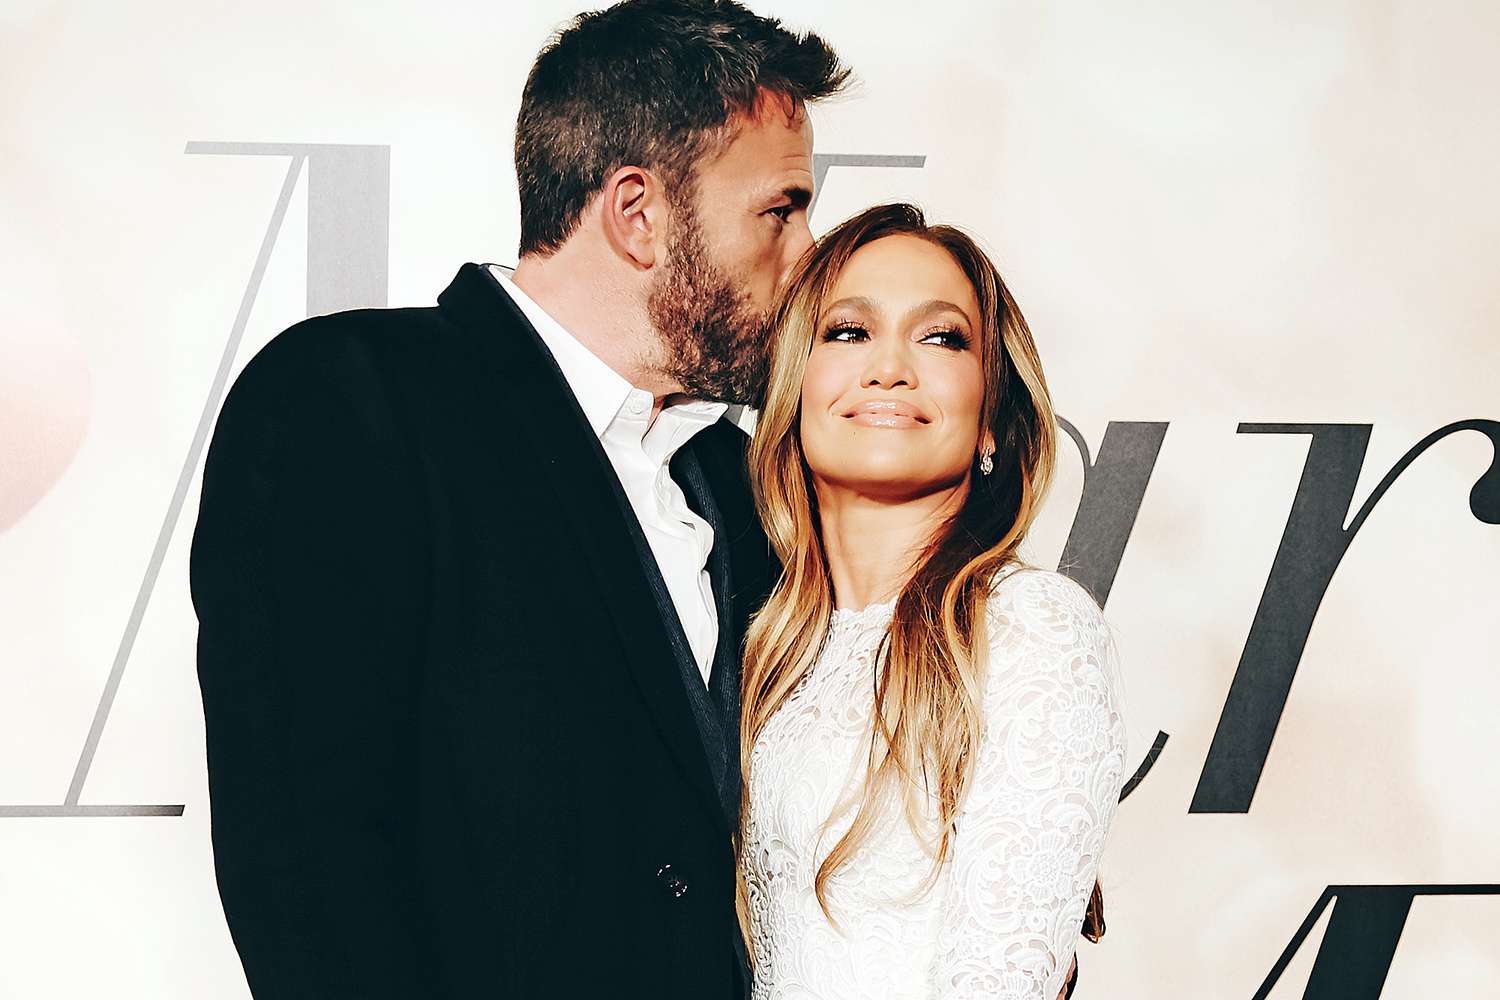 LOS ANGELES, CALIFORNIA - FEBRUARY 08: Ben Affleck and Jennifer Lopez attend the Los Angeles special screening of "Marry Me" on February 08, 2022 in Los Angeles, California. (Photo by Rich Fury/WireImage)